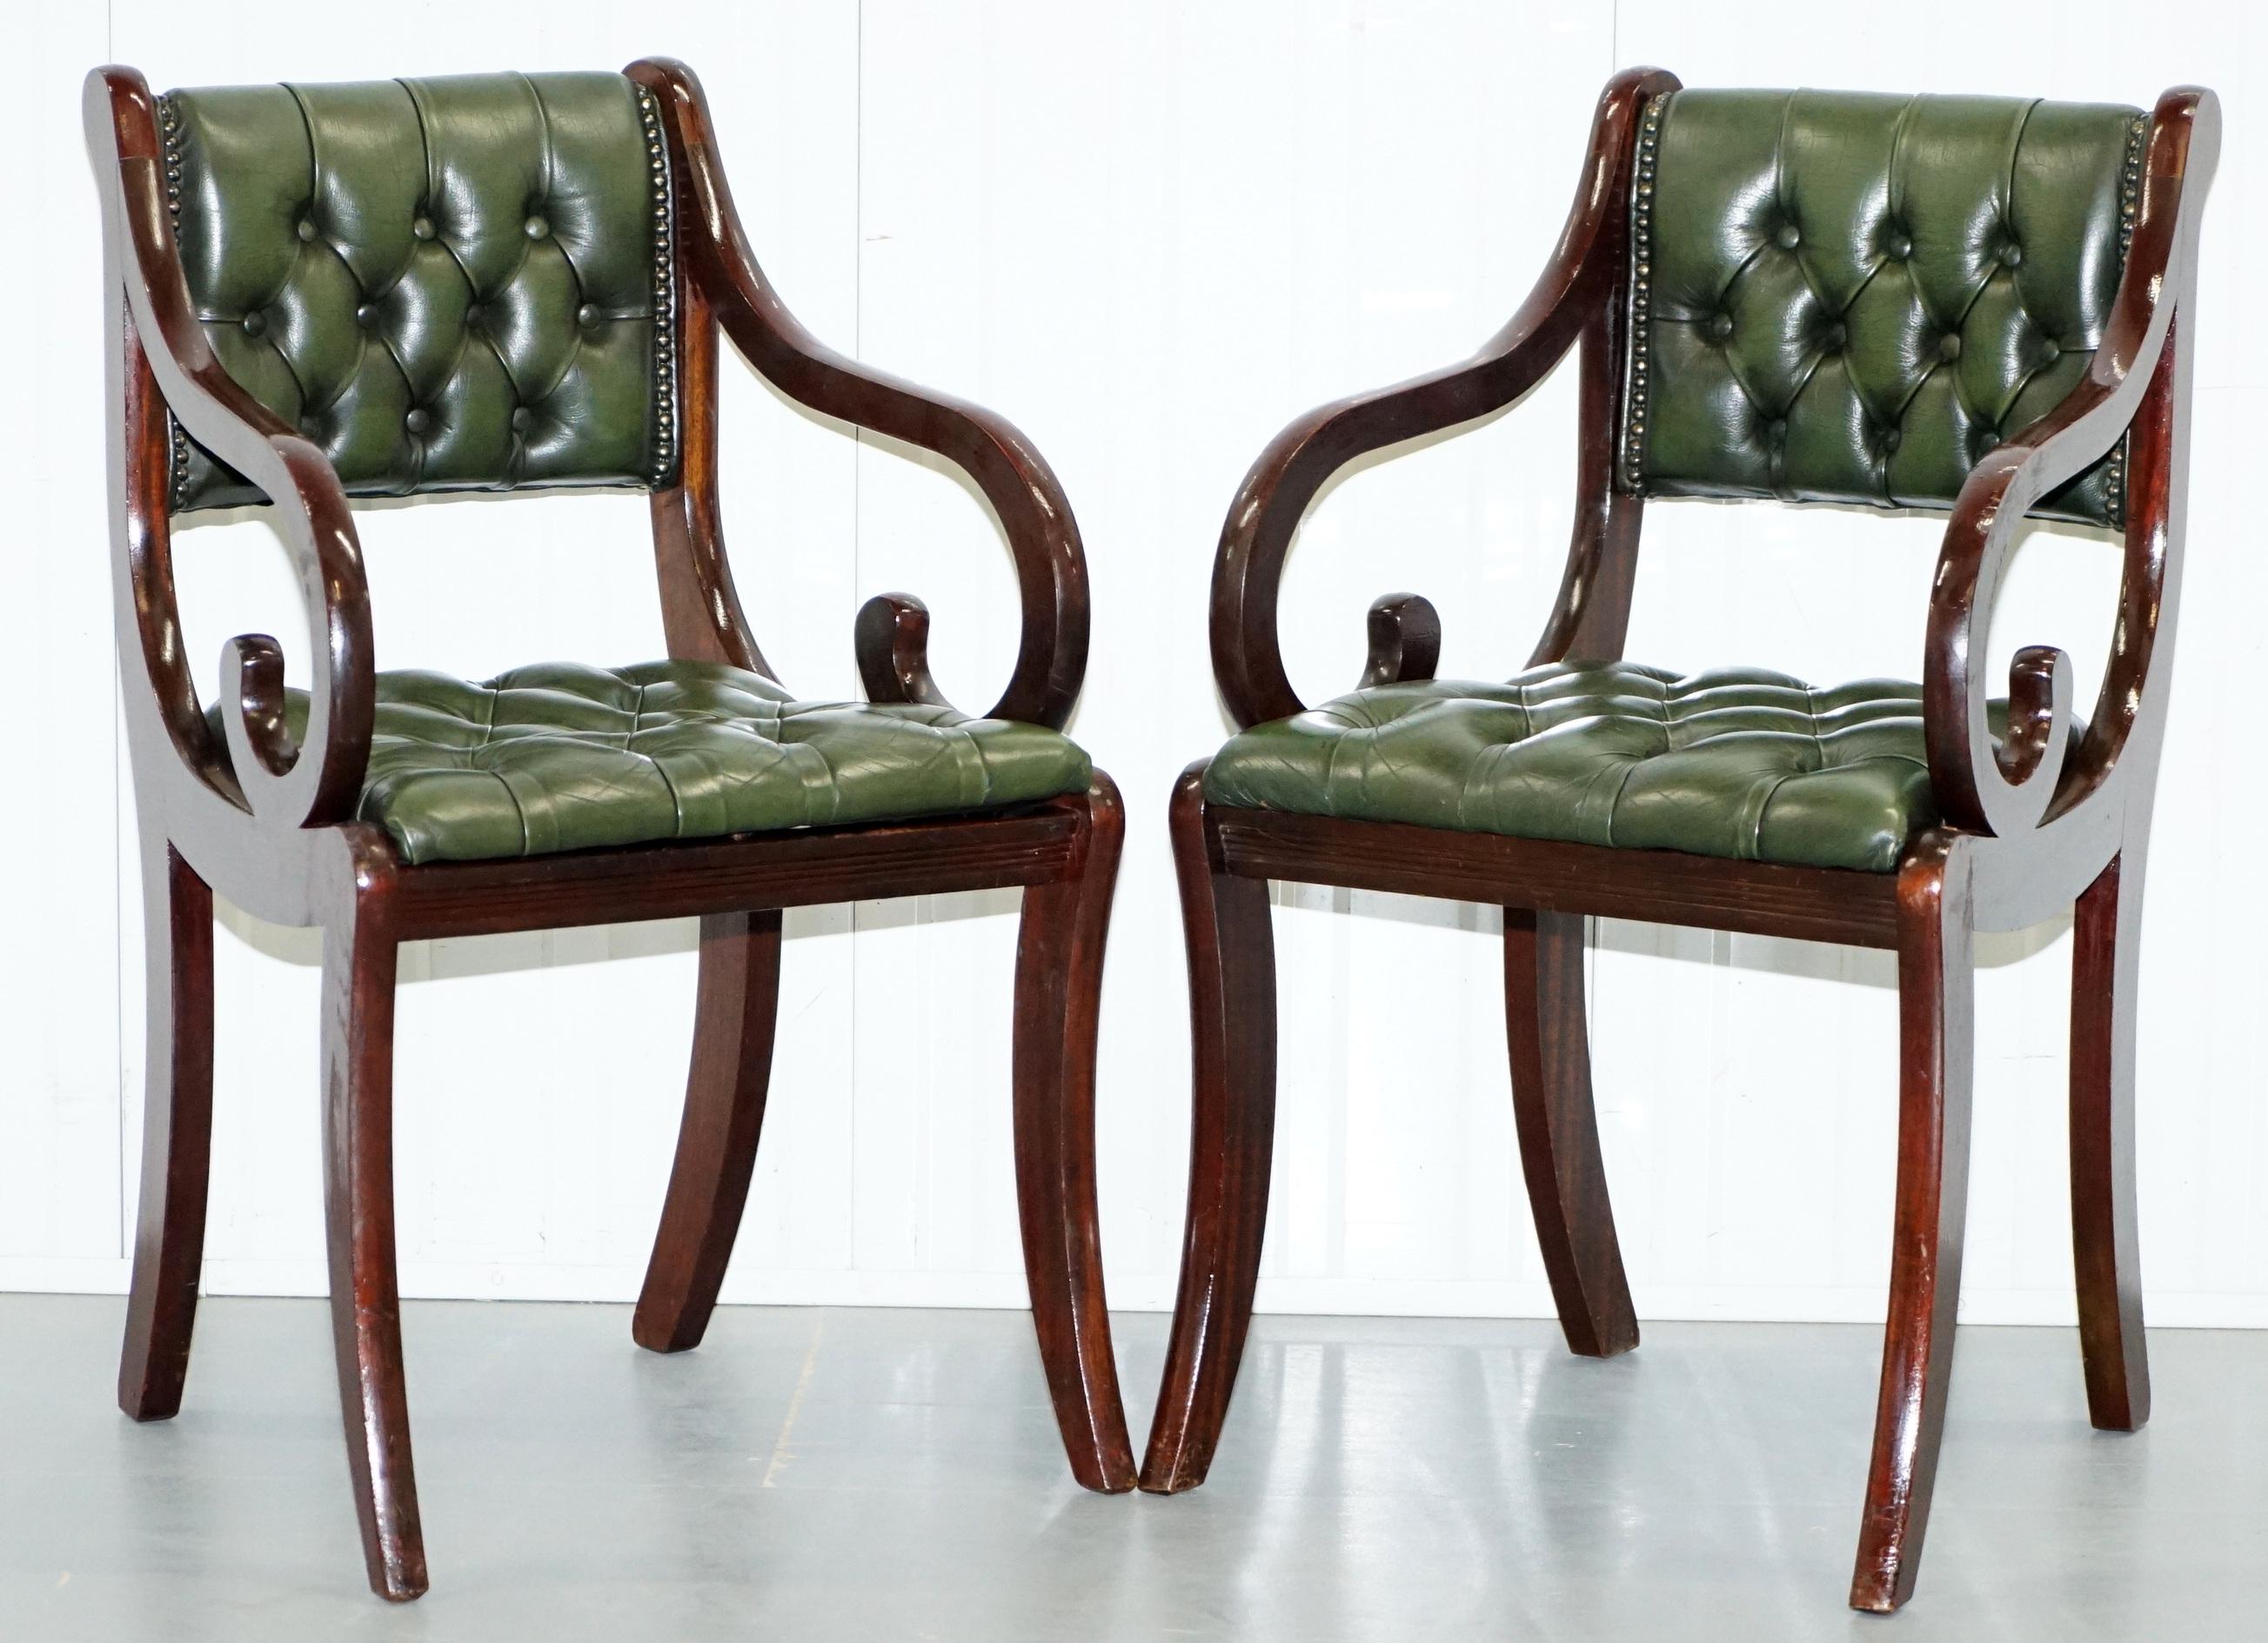 6 Mahogany Beresford & Hicks England Dining Chairs Chesterfield Leather Hide 3